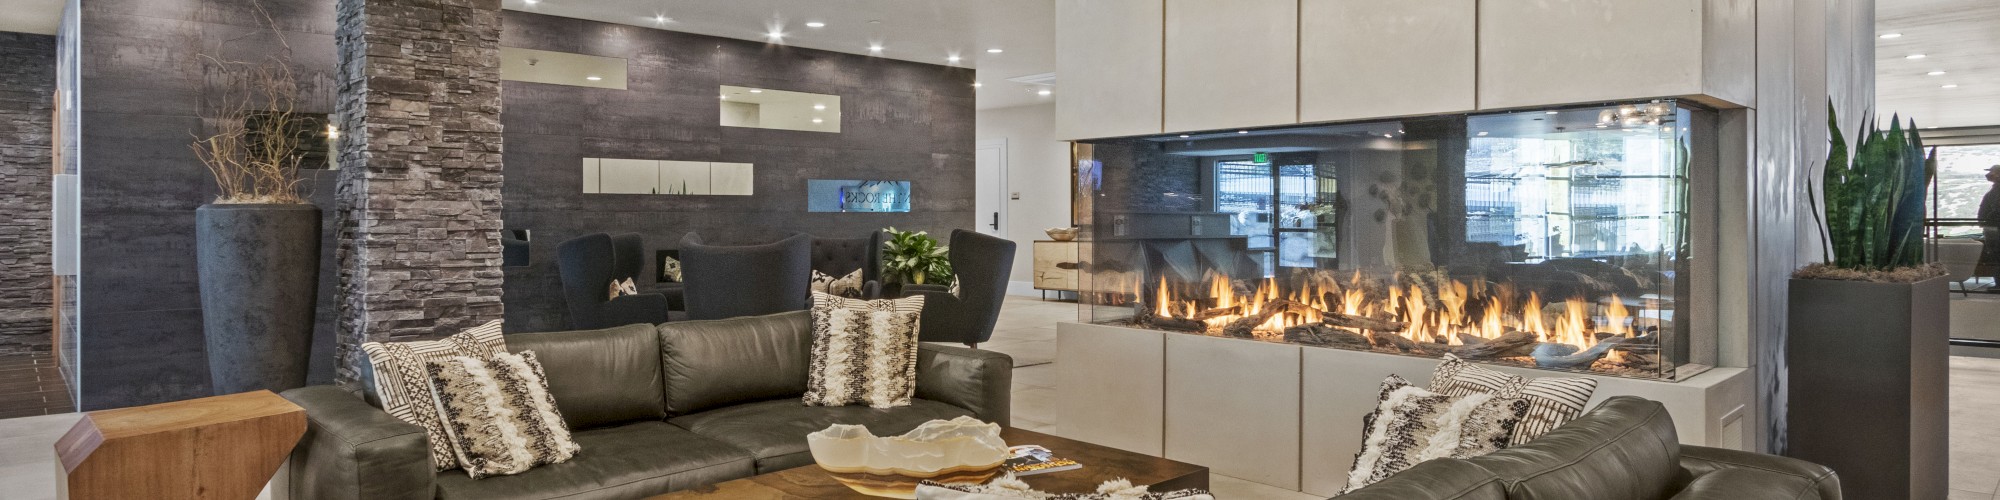 A modern living room with gray sofas, a stylish chandelier, a stone accent wall, a large fireplace, and a mix of wood and white decor finishes the sentence.